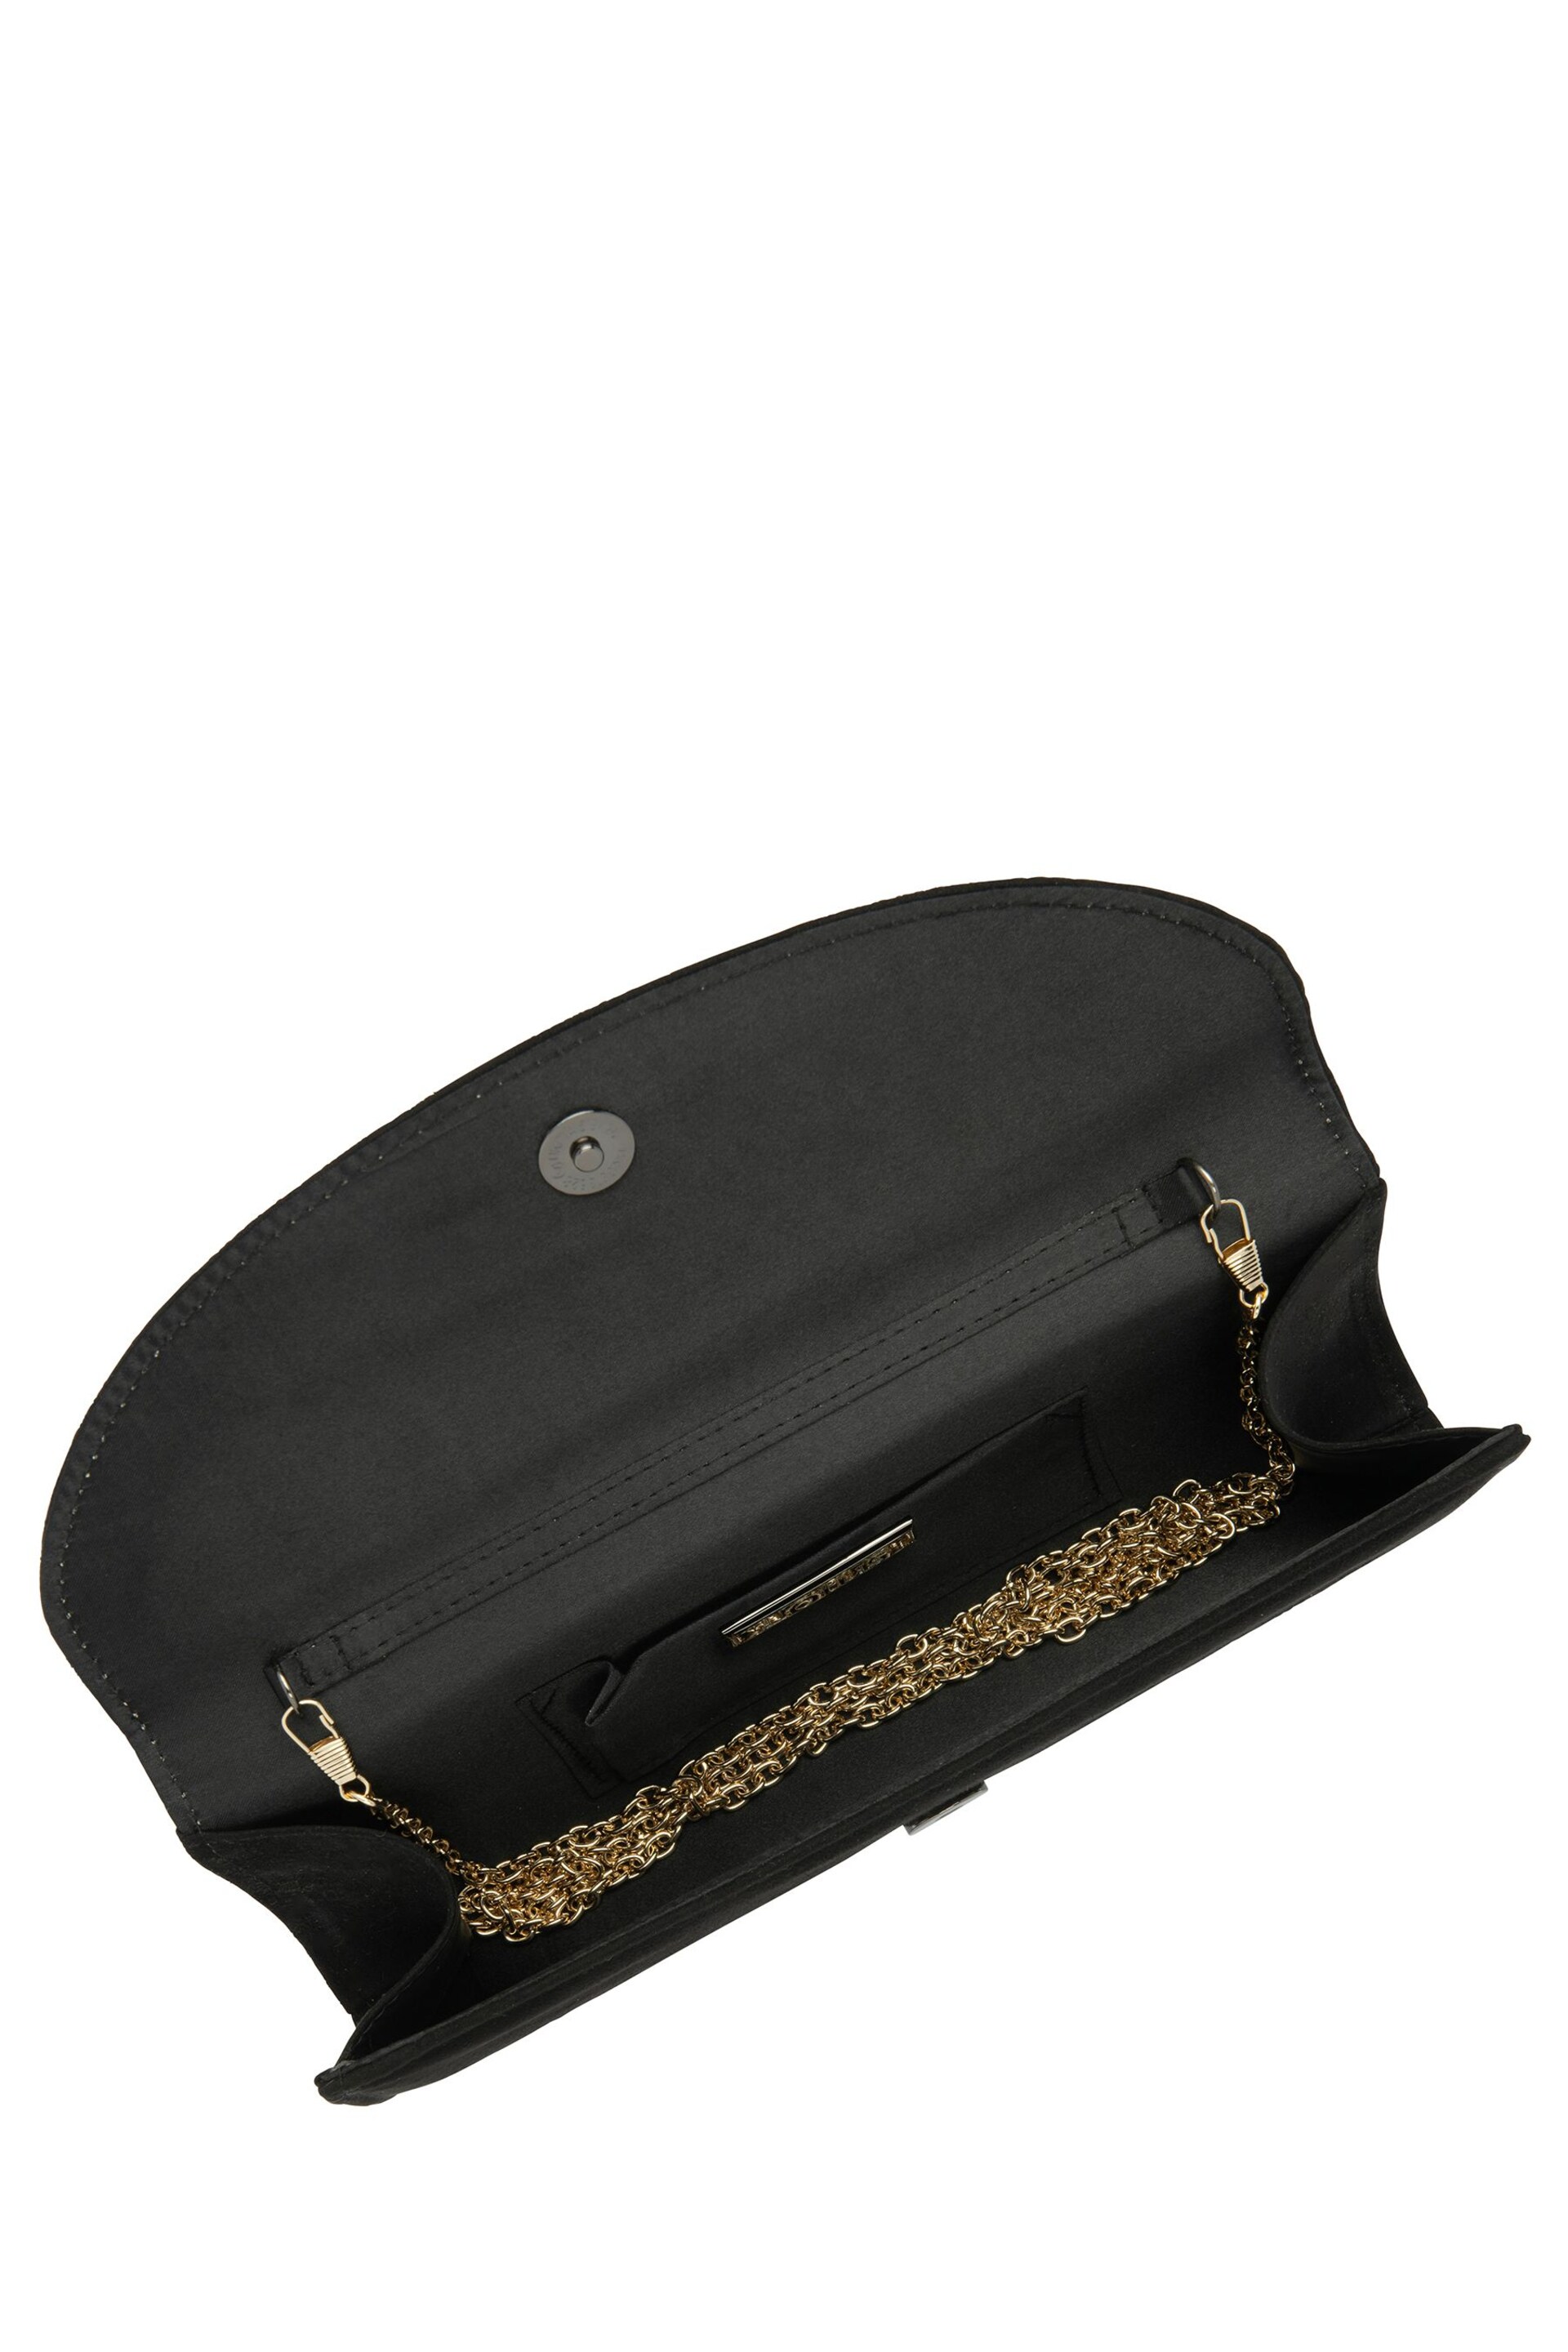 Lotus Black Clutch Bag with Chain - Image 3 of 4